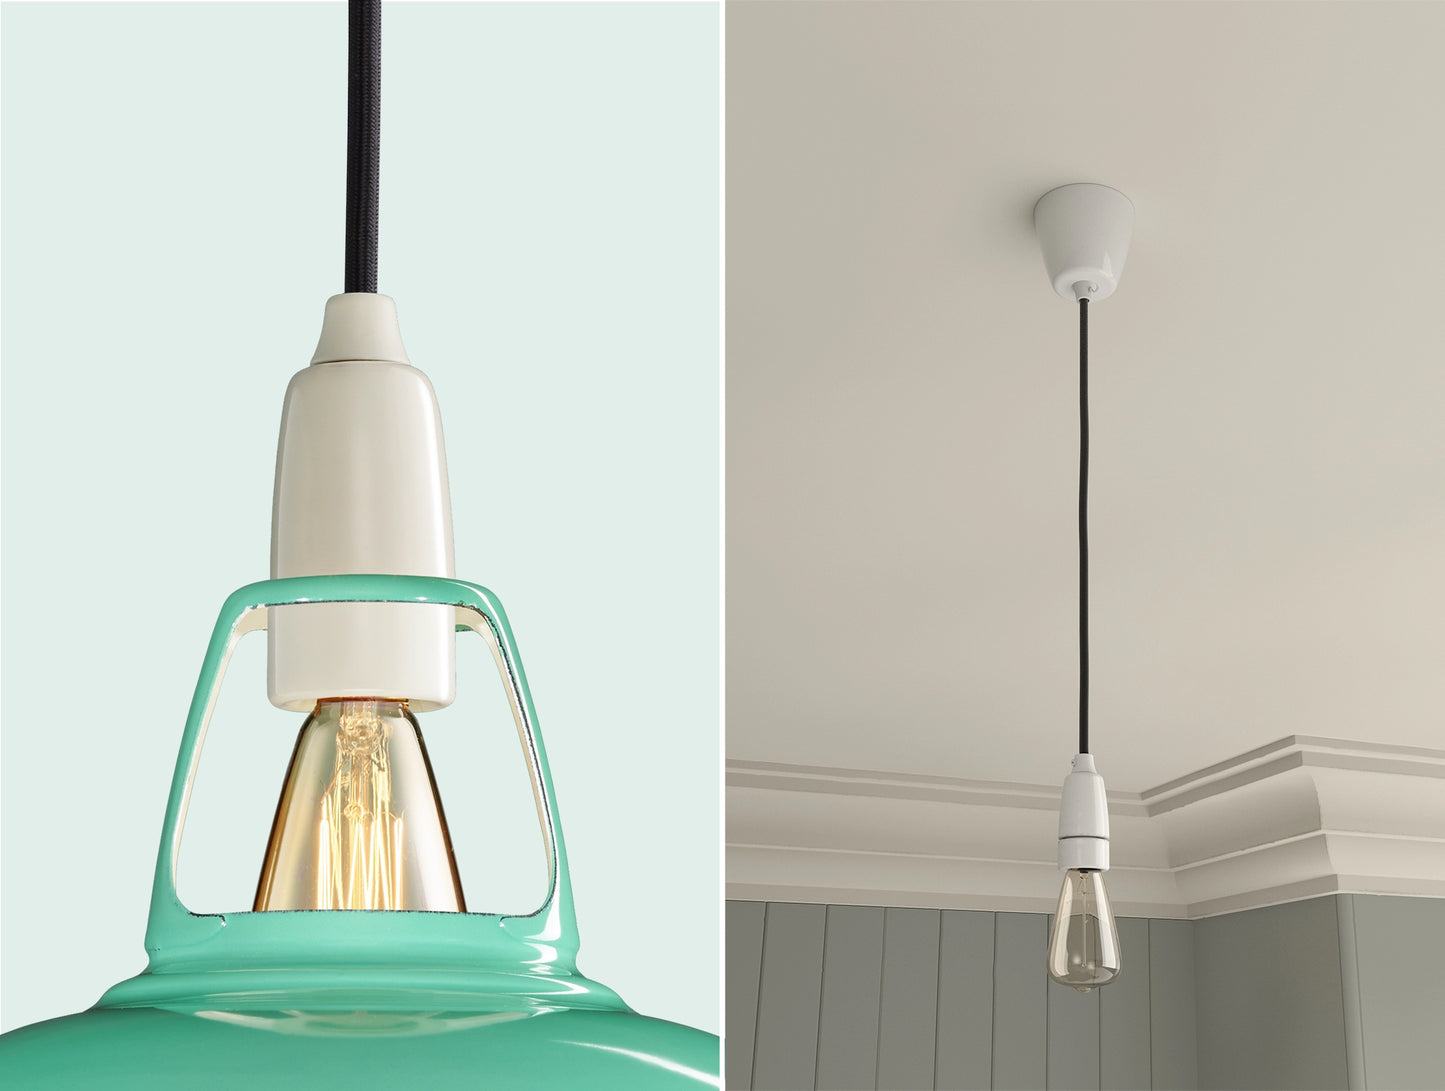 Close up of an E14 Porcelain suspension set on a Fresh Teal lampshade on the left. On the right, an E14 Porcelain pendant set with a lightbulb is hanging from the ceiling